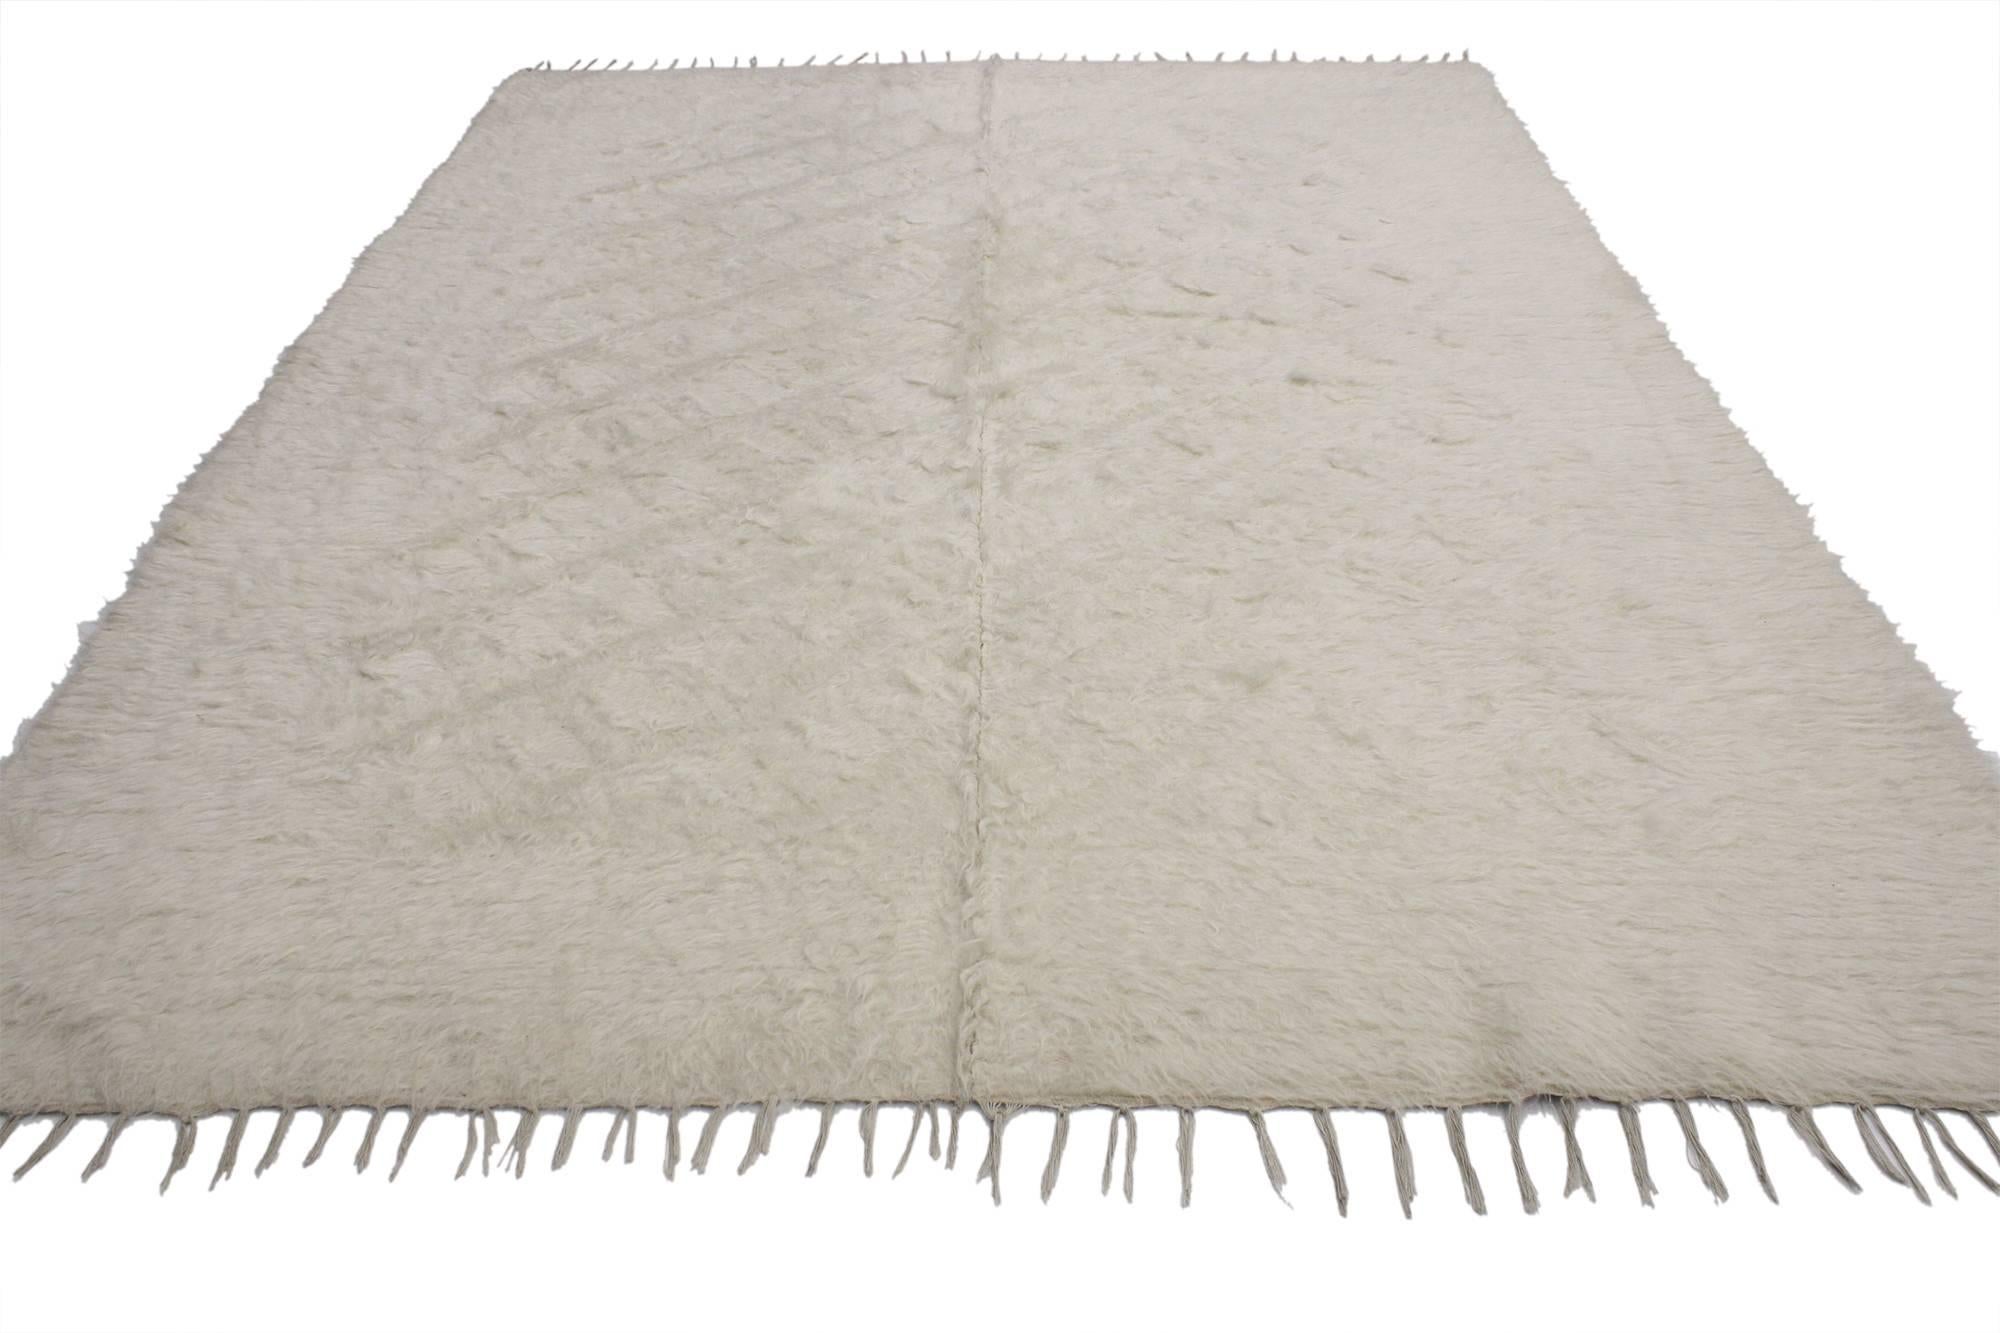 52108, Vintage Turkish Angora Wool Rug with Modern Minimalist Style. This vintage Turkish angora wool rug displays an inconspicuous allover lozenge trellis pattern. This Turkish angora wool rug balances comfort and style while conveying absolute